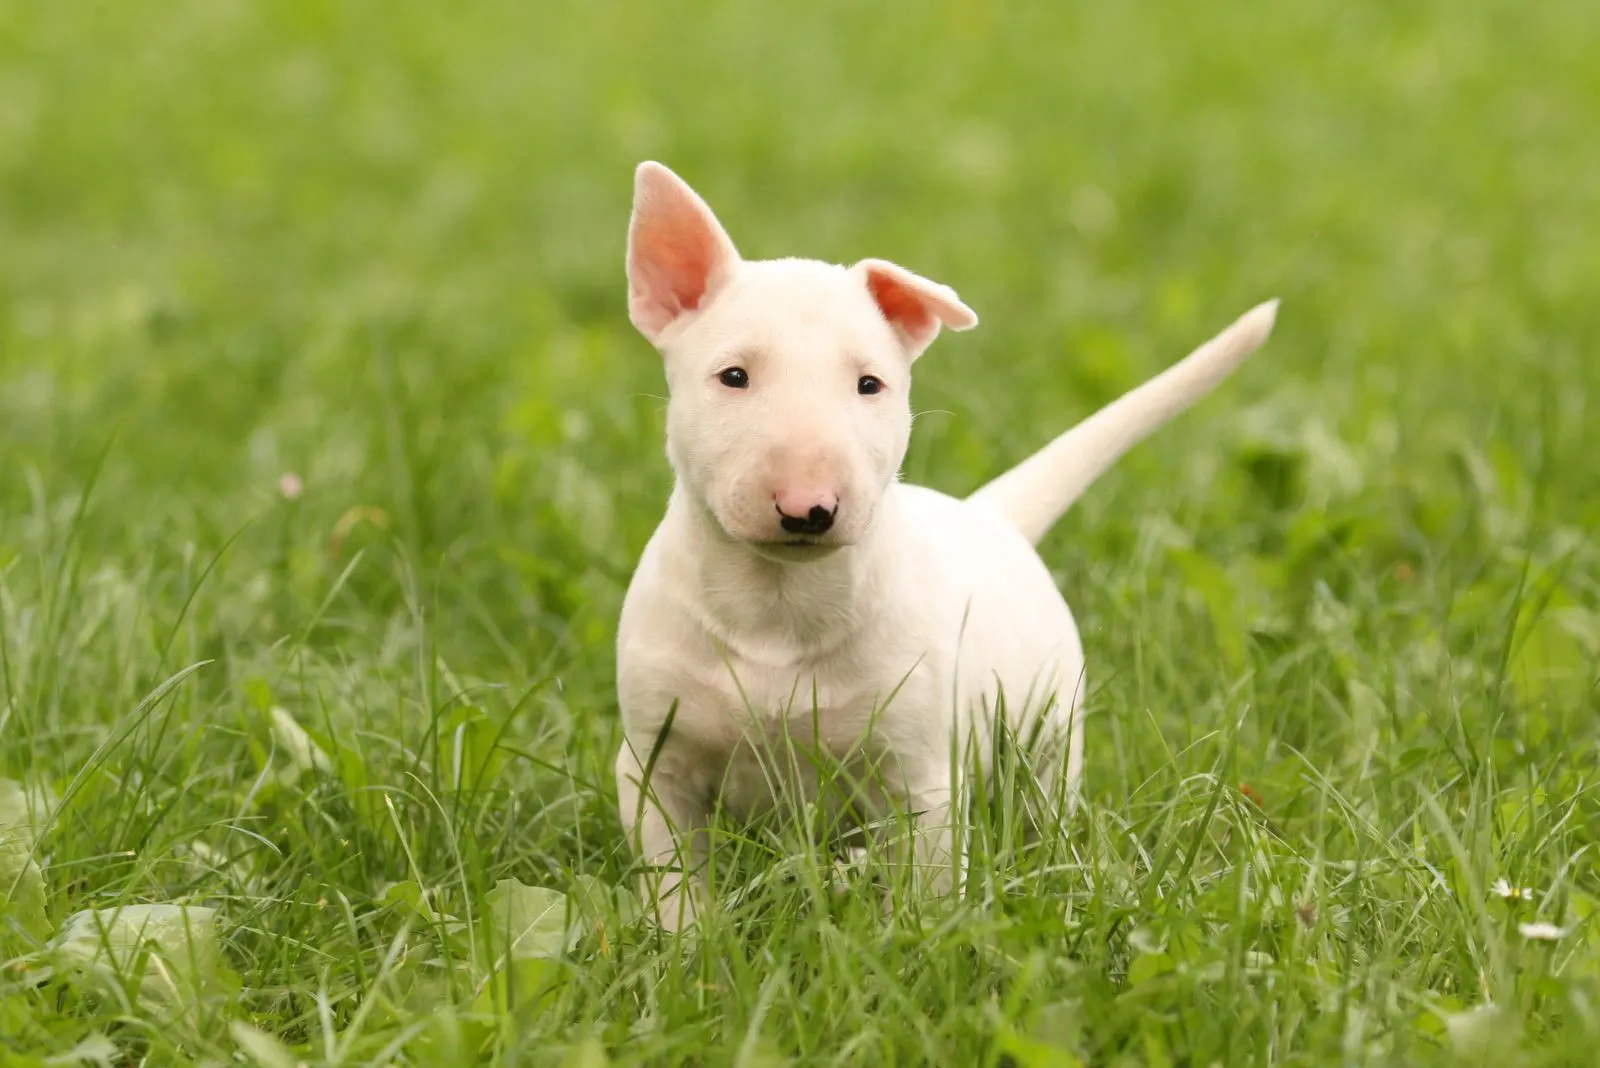 Bull Terrier puppy standing in a meadow